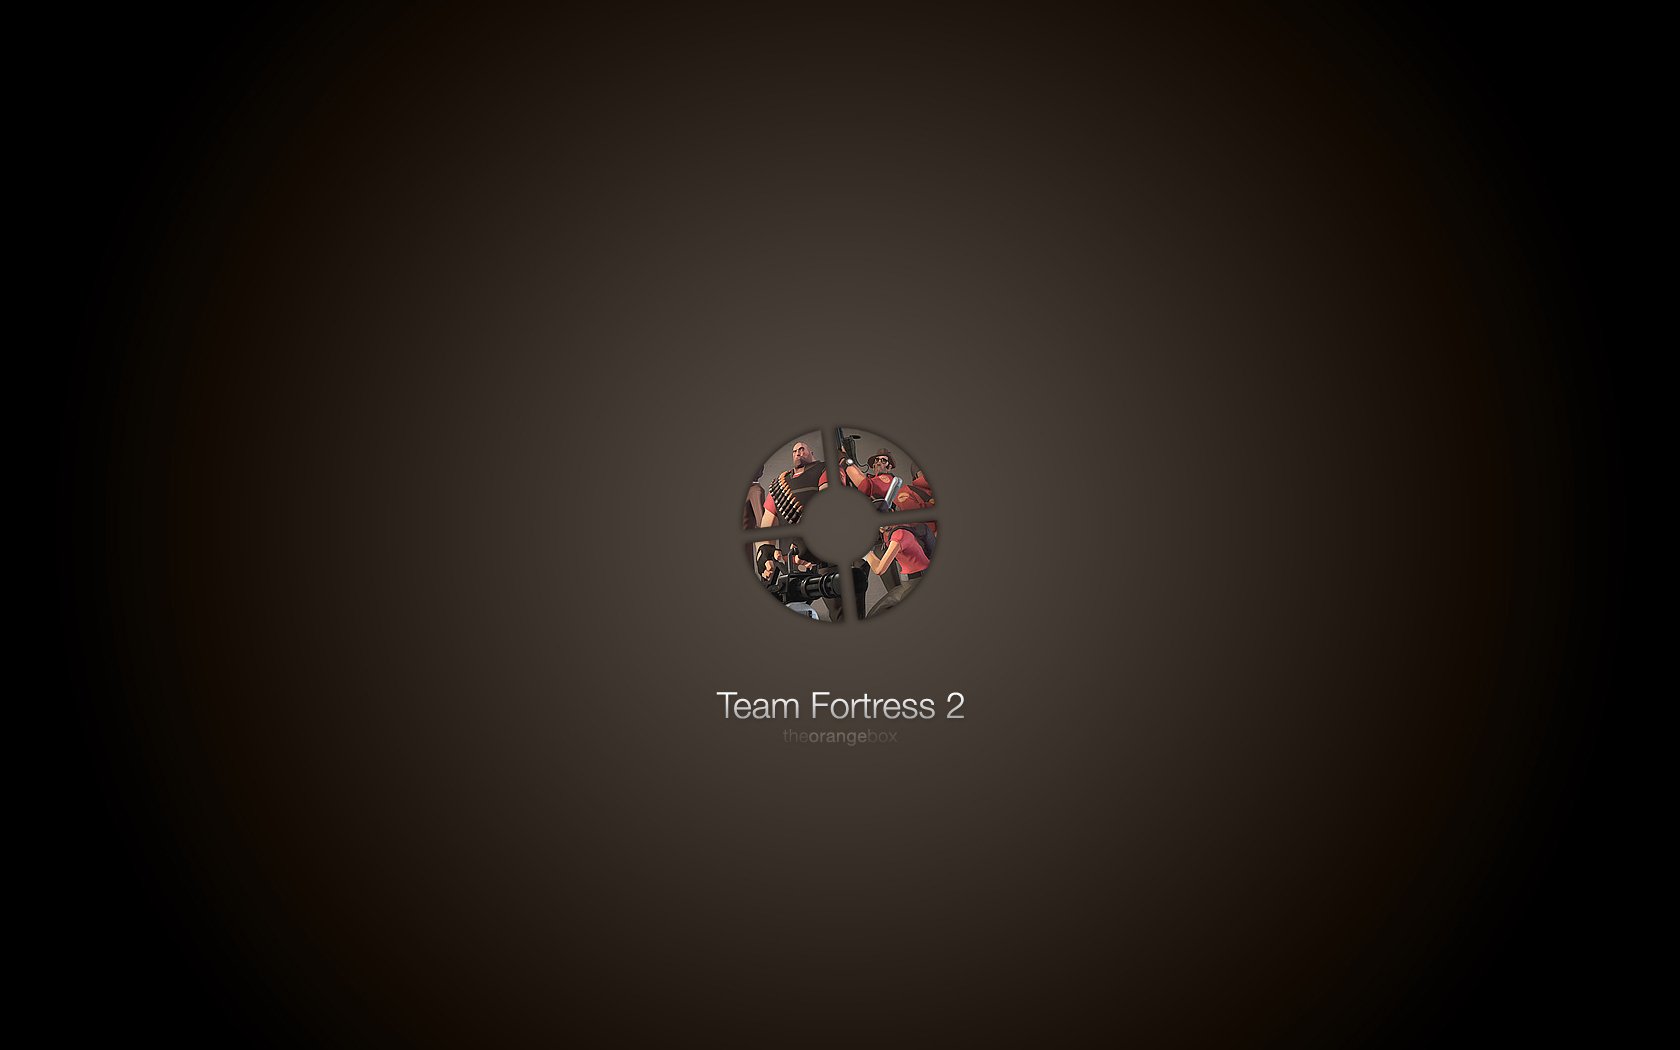 team fortress 2 hacking